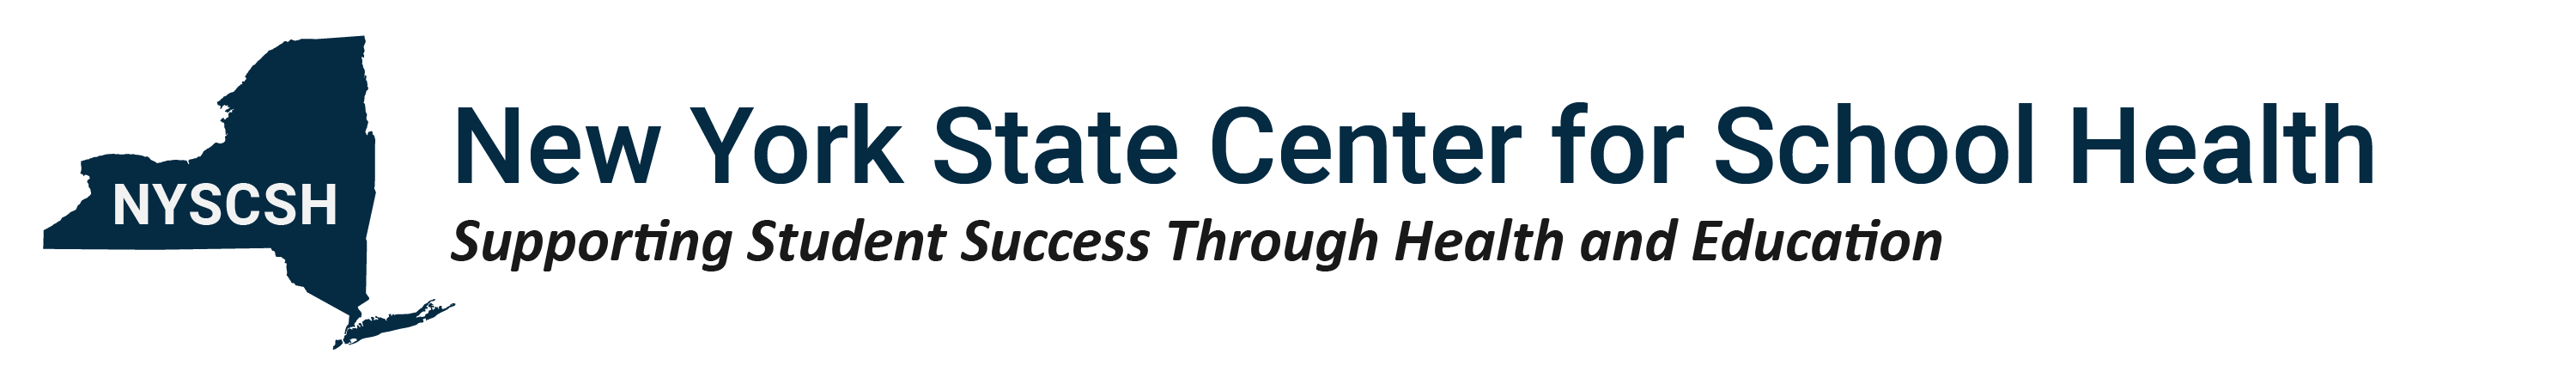 New York State Center for School Health LMS